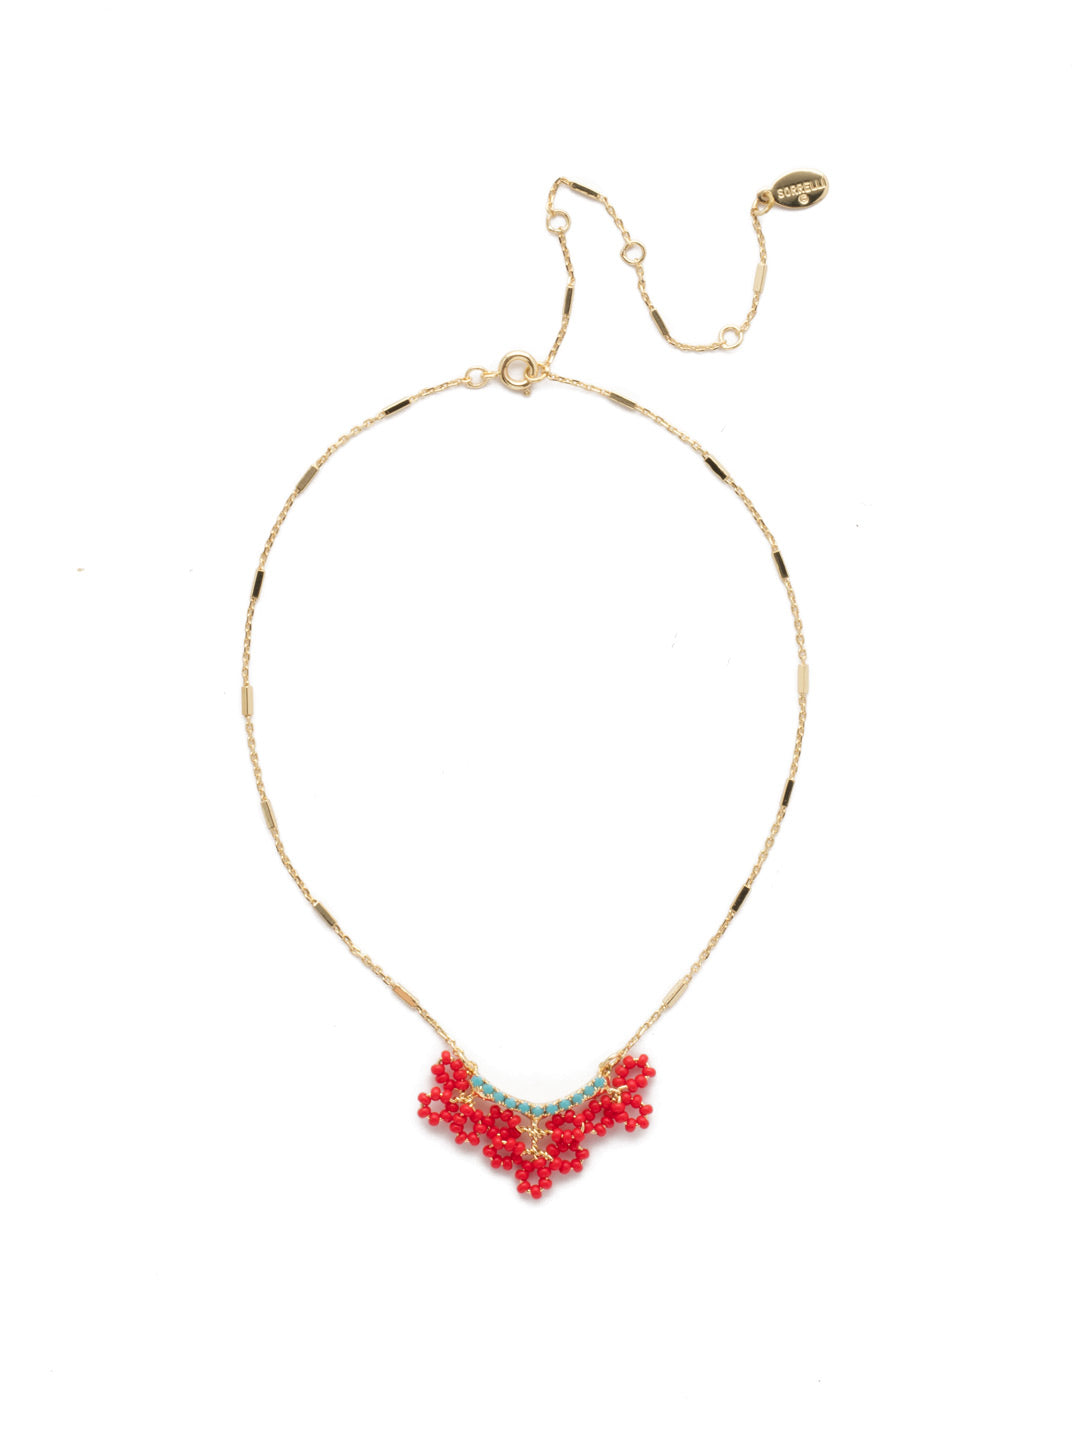 Sefina Pendant Necklace - NEH8BGRTU - Clusters of handcrafted beadwork and delicate crystals on an adjustable strand will make you feel like an Island princess. From Sorrelli's Ruby Moroccan Turquoise collection in our Bright Gold-tone finish.